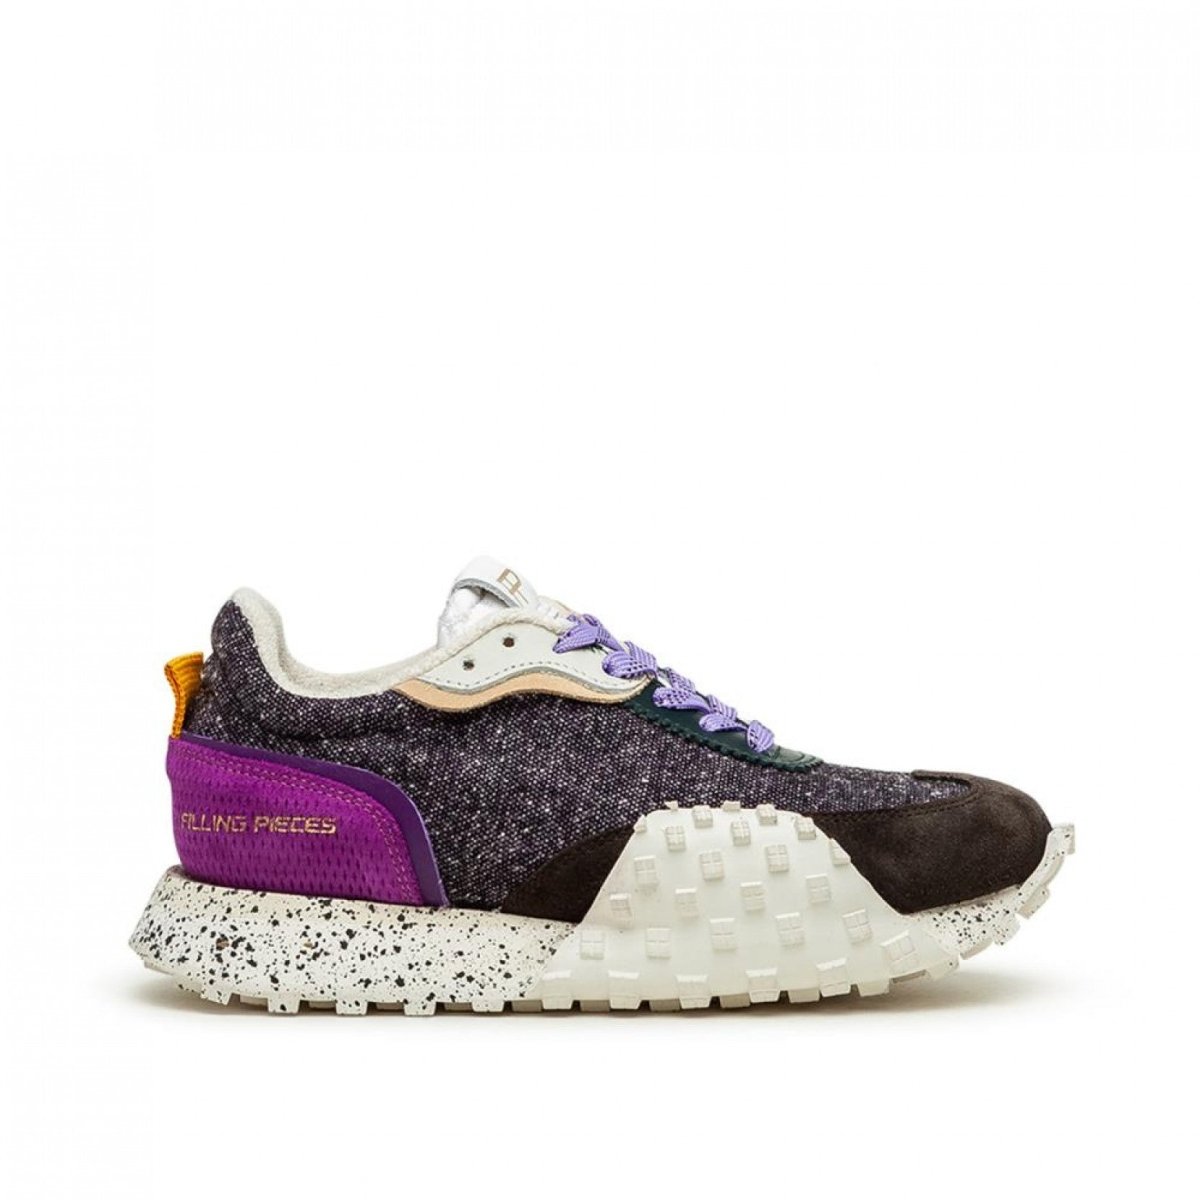 Image of Filling Pieces Crease Runner Wind (Purple / Black)